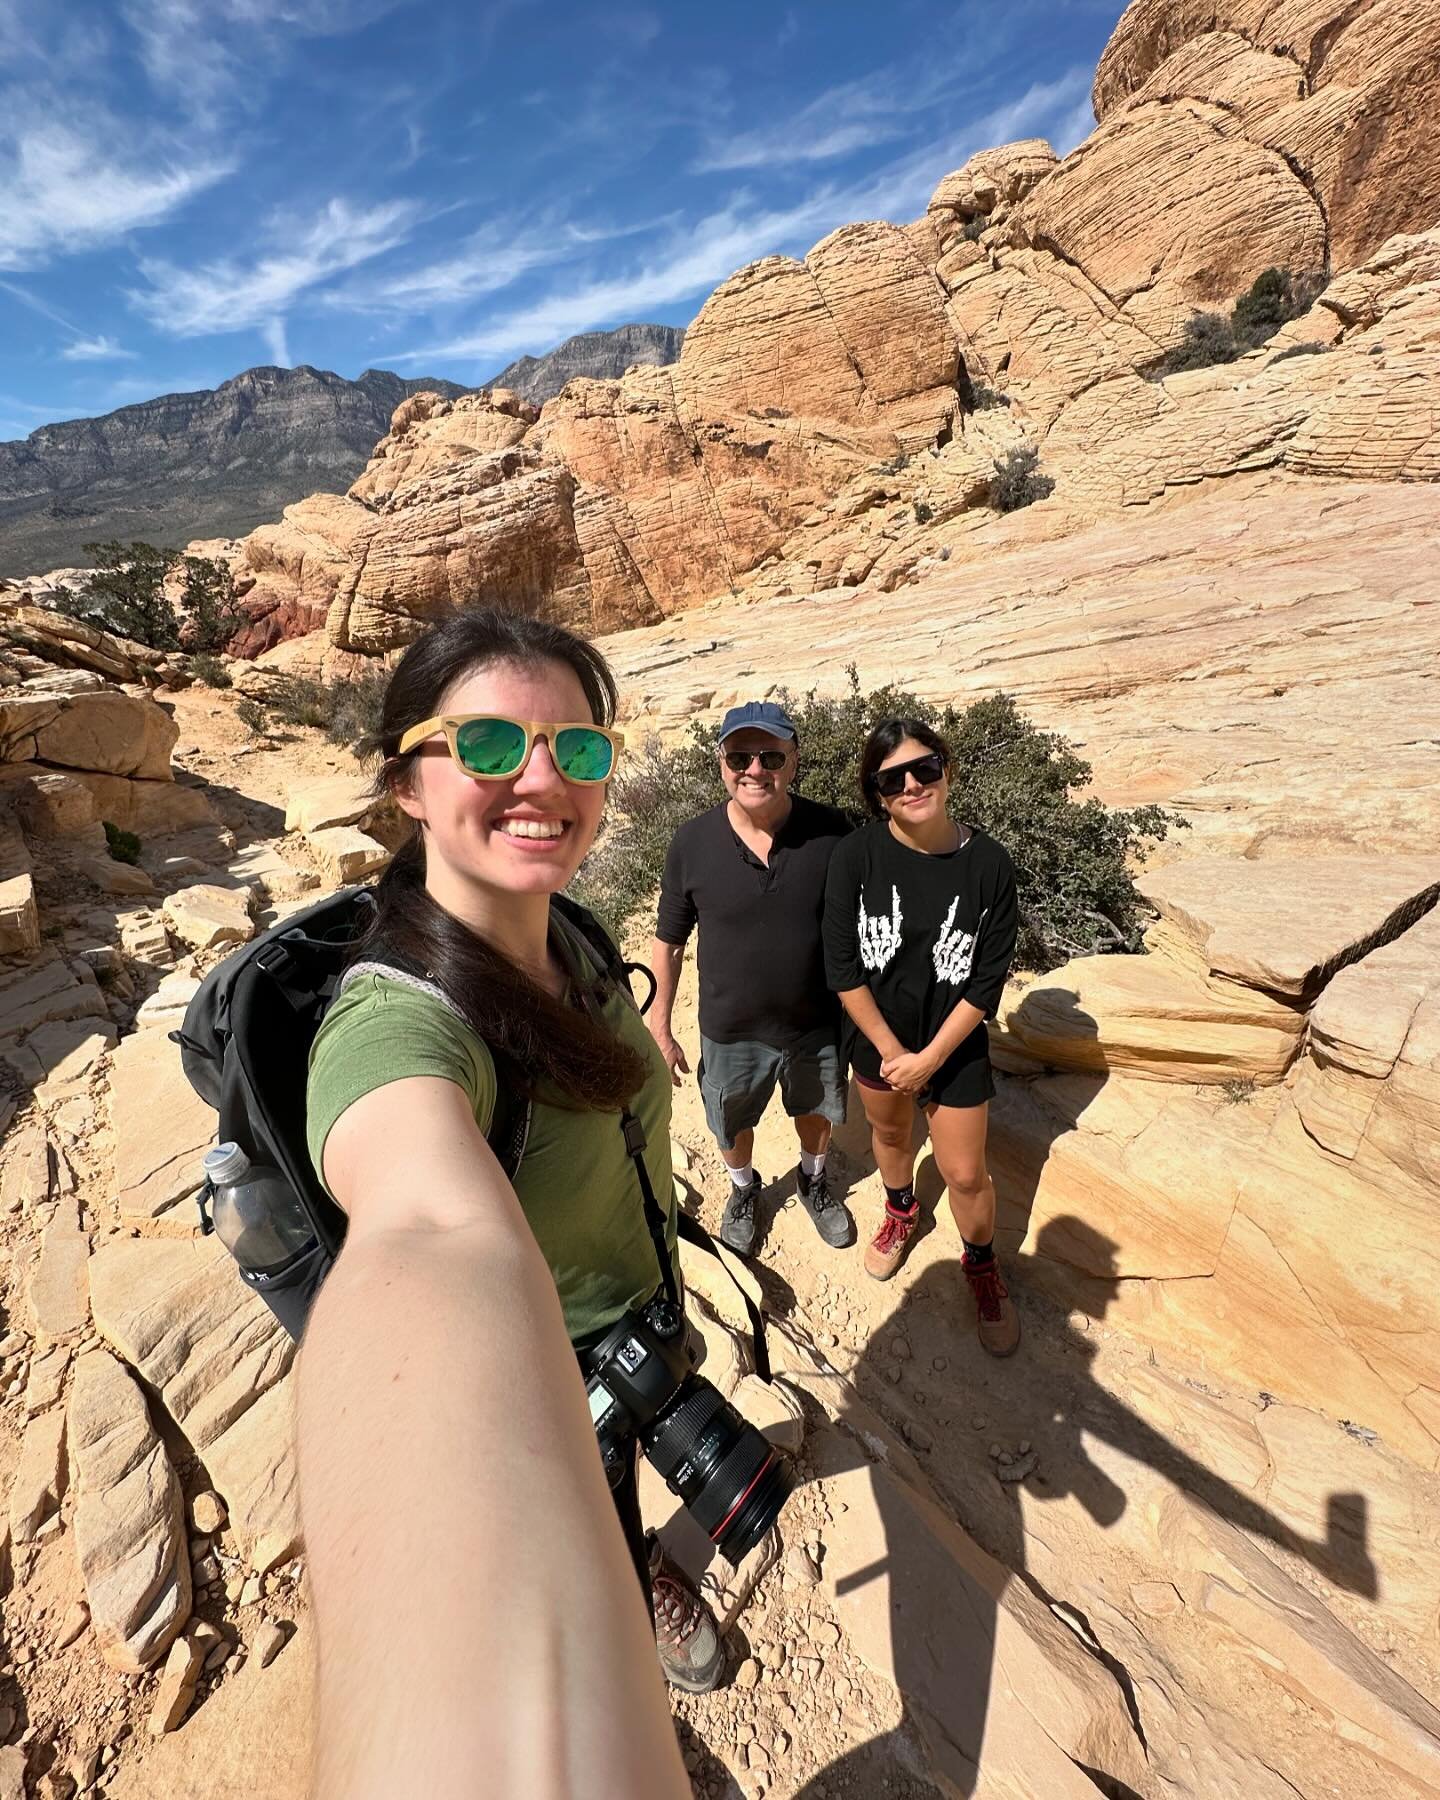 Nevada is STUNNING! 😍

I have only visited twice, and each time I was in awe of the landscape. All these photos are from Red Rock Canyon, which I highly recommend adding to your bucket lists. It is right outside of Vegas and has fun hikes and beauti